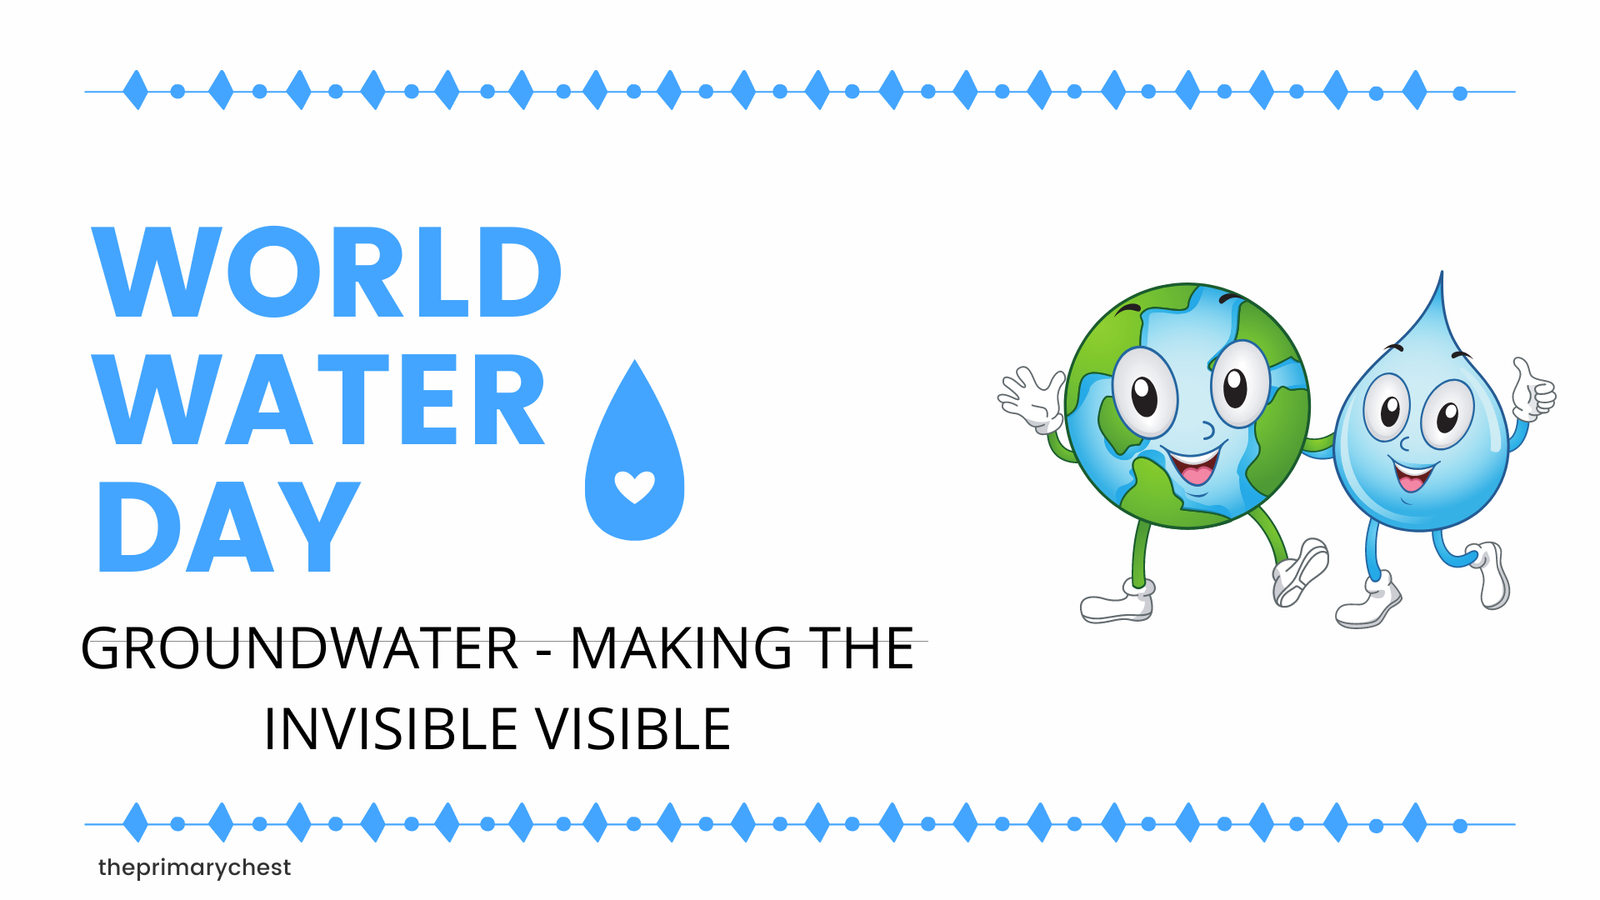 Illustration for World Water Day, focusing on groundwater awareness.